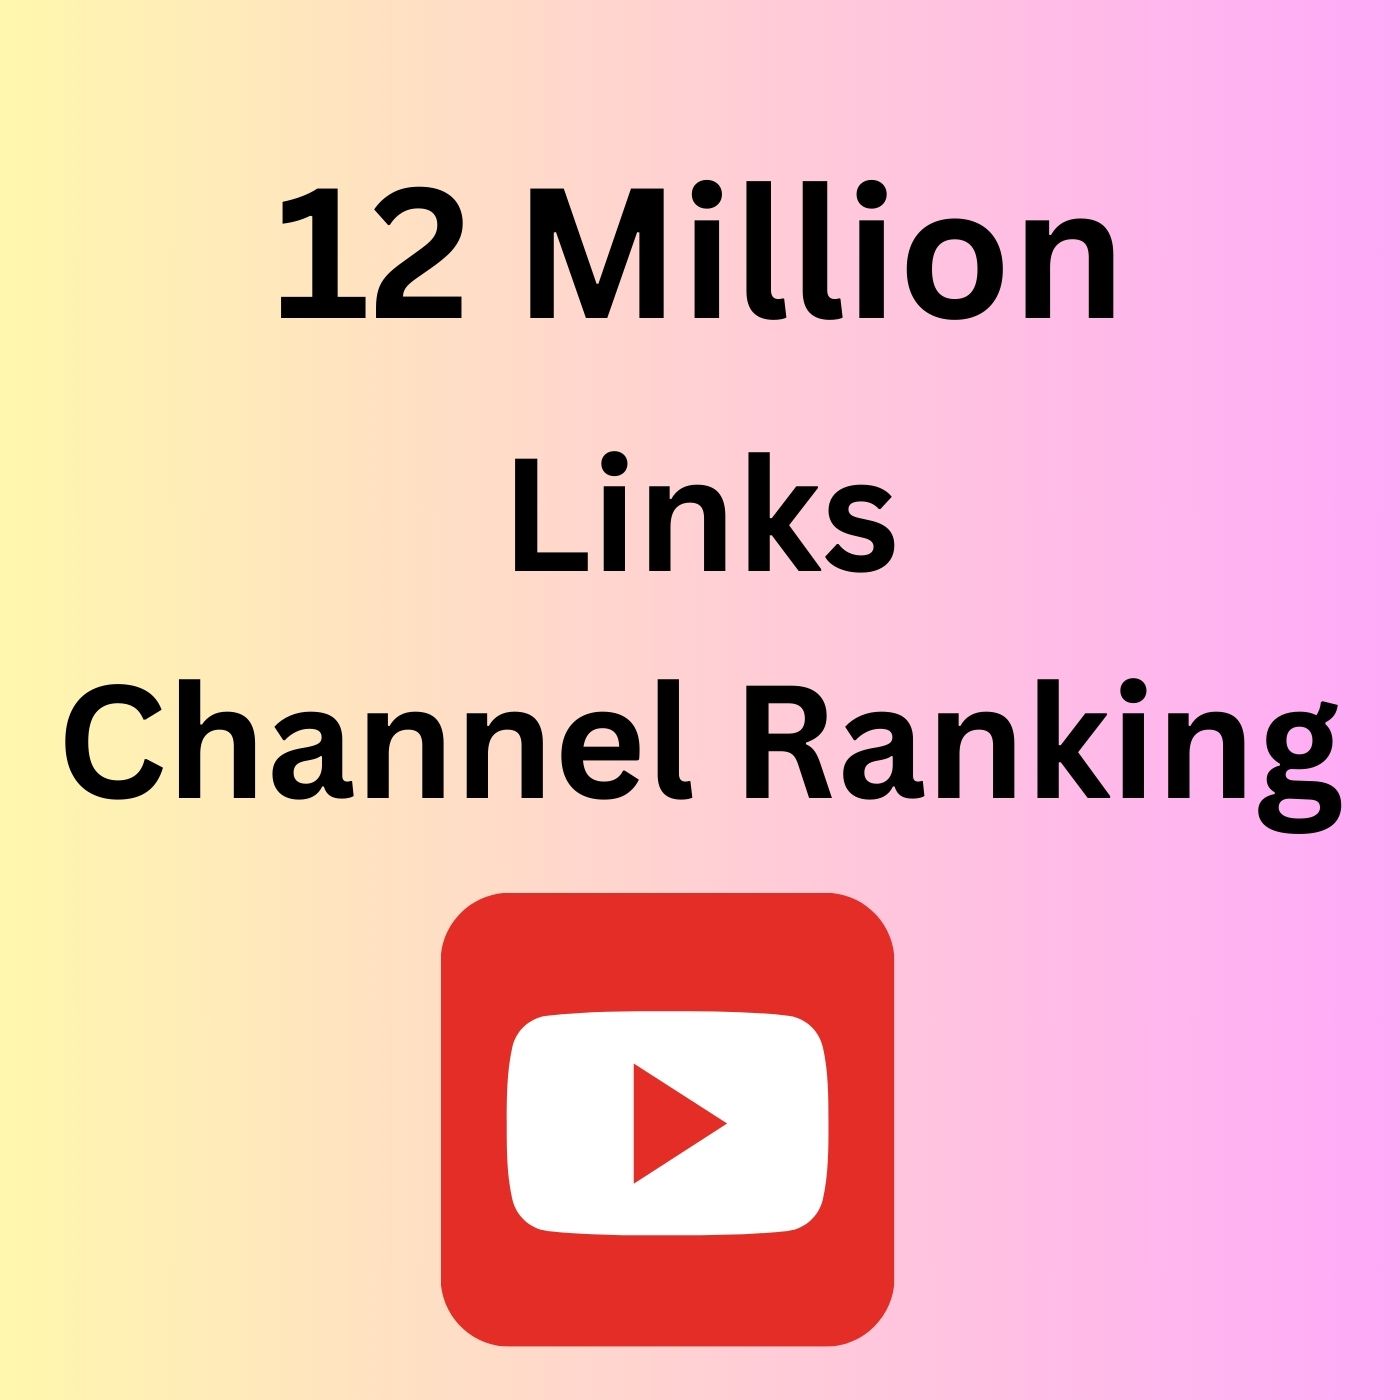 Optimize your YouTube Channel with 12 Million Keyword-Targeted Backlinks and 12 Million Embeds for the 10 Latest Videos